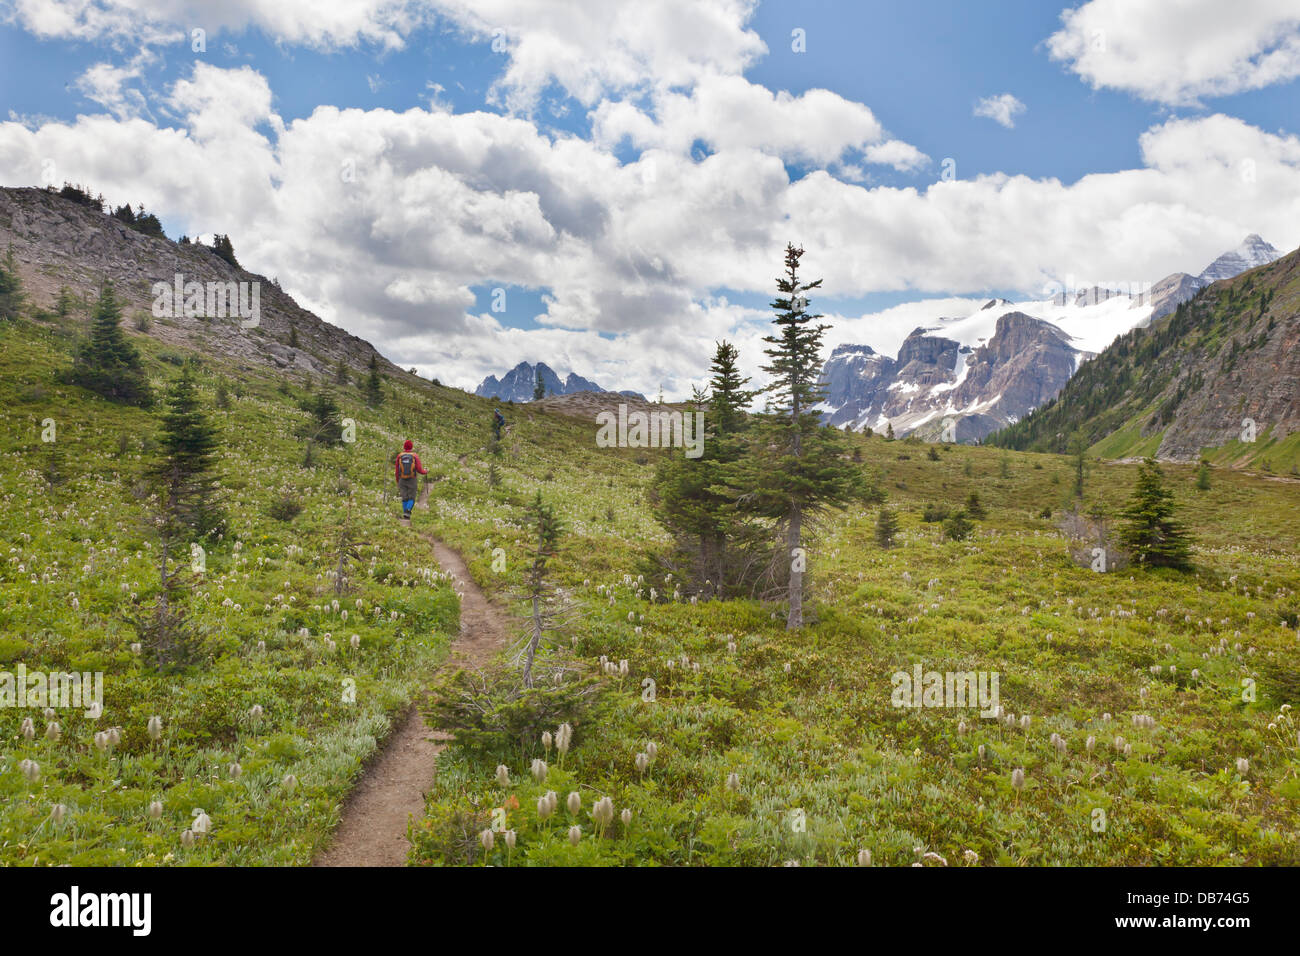 Canada, British Columbia, Mount Assiniboine Provincial Park. Hikers on trail through Wonder Pass. Stock Photo